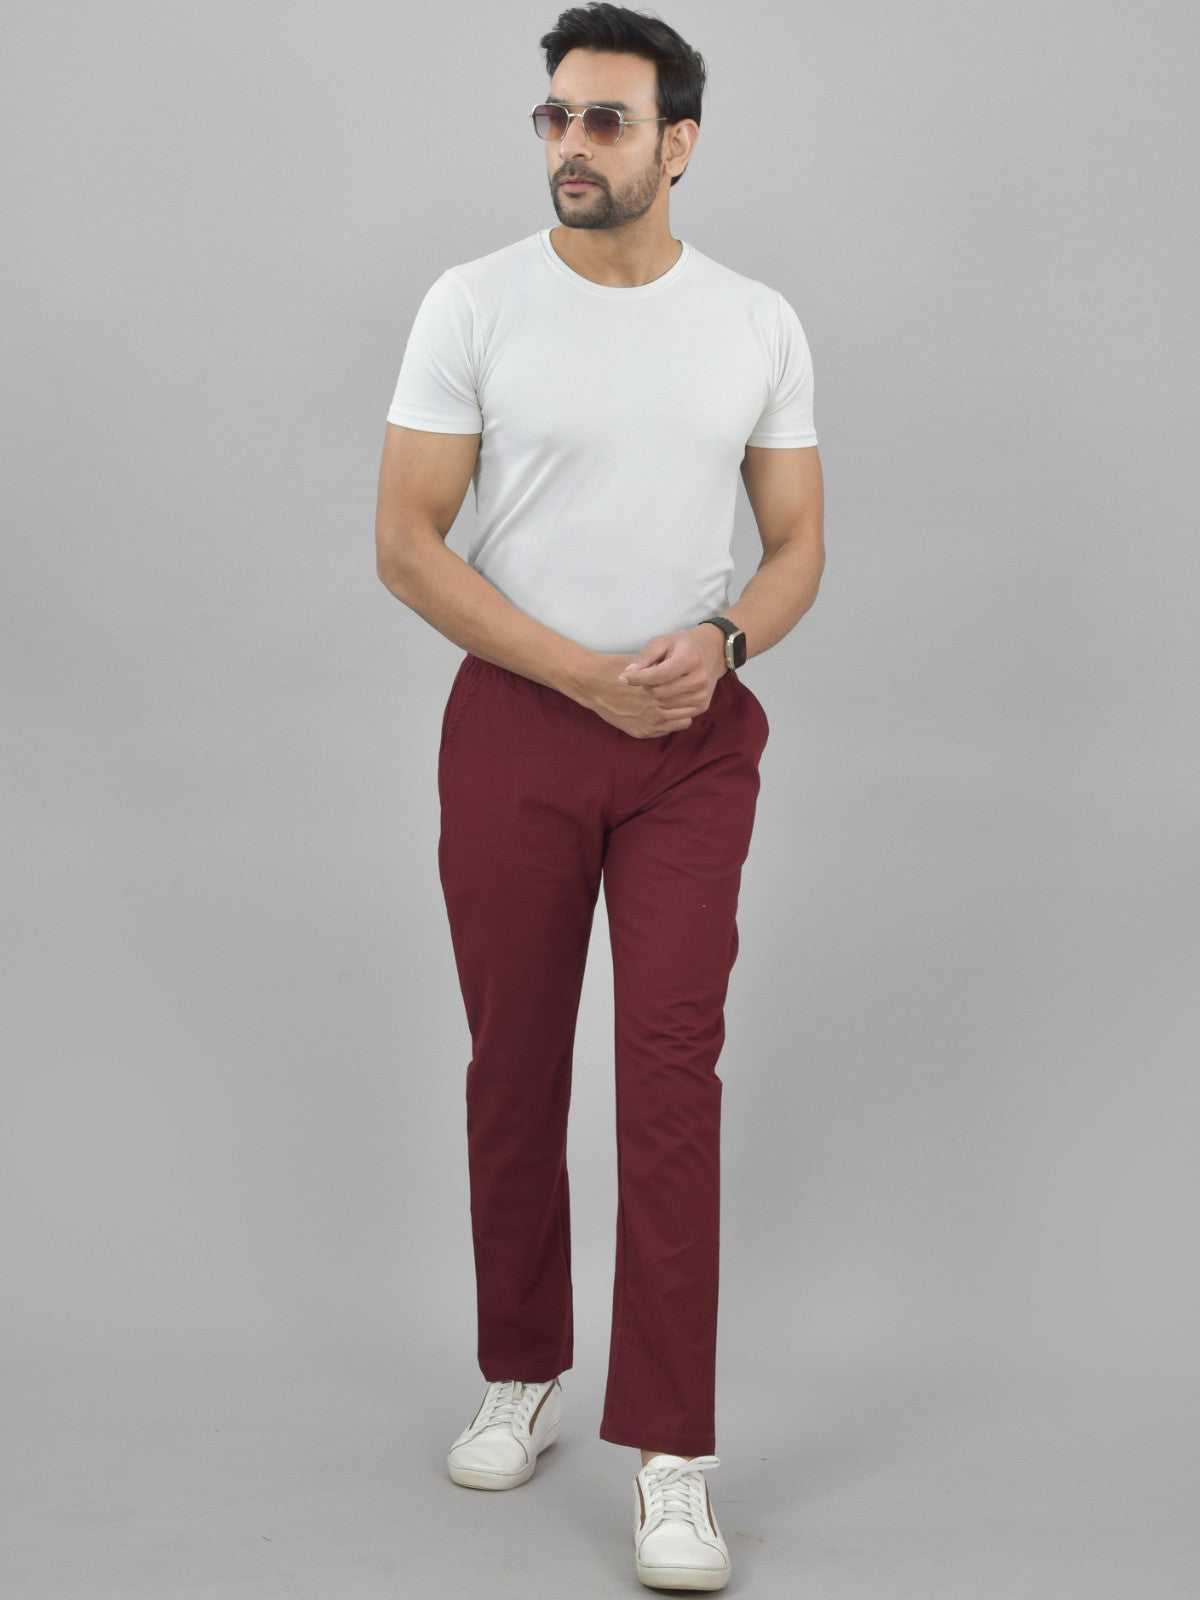 Combo Pack Of Mens Melange Grey And Wine Regualr Fit Cotton Trouser